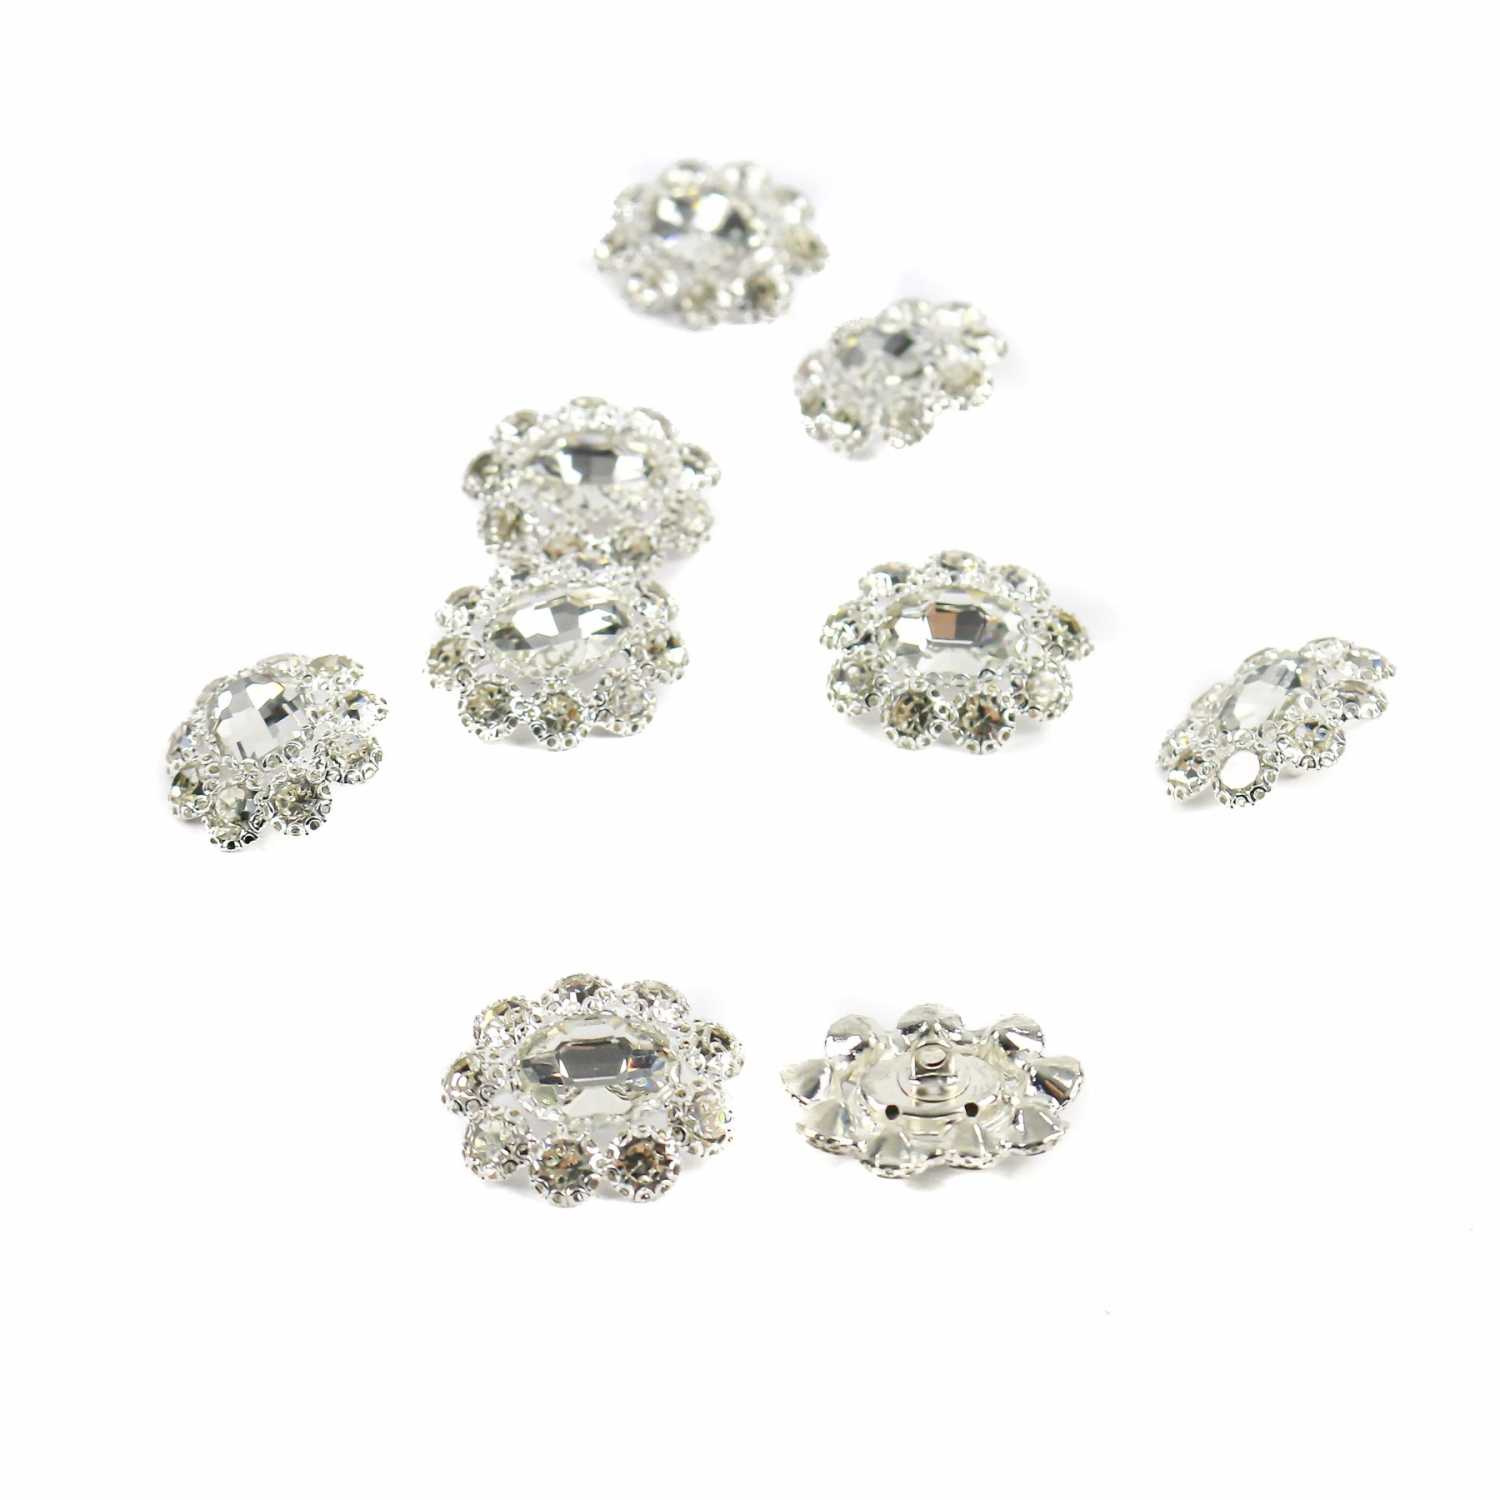 Shank Buttons with Rhinestones, Size 25x22 mm (10 pcs/pack) Code: BT1015